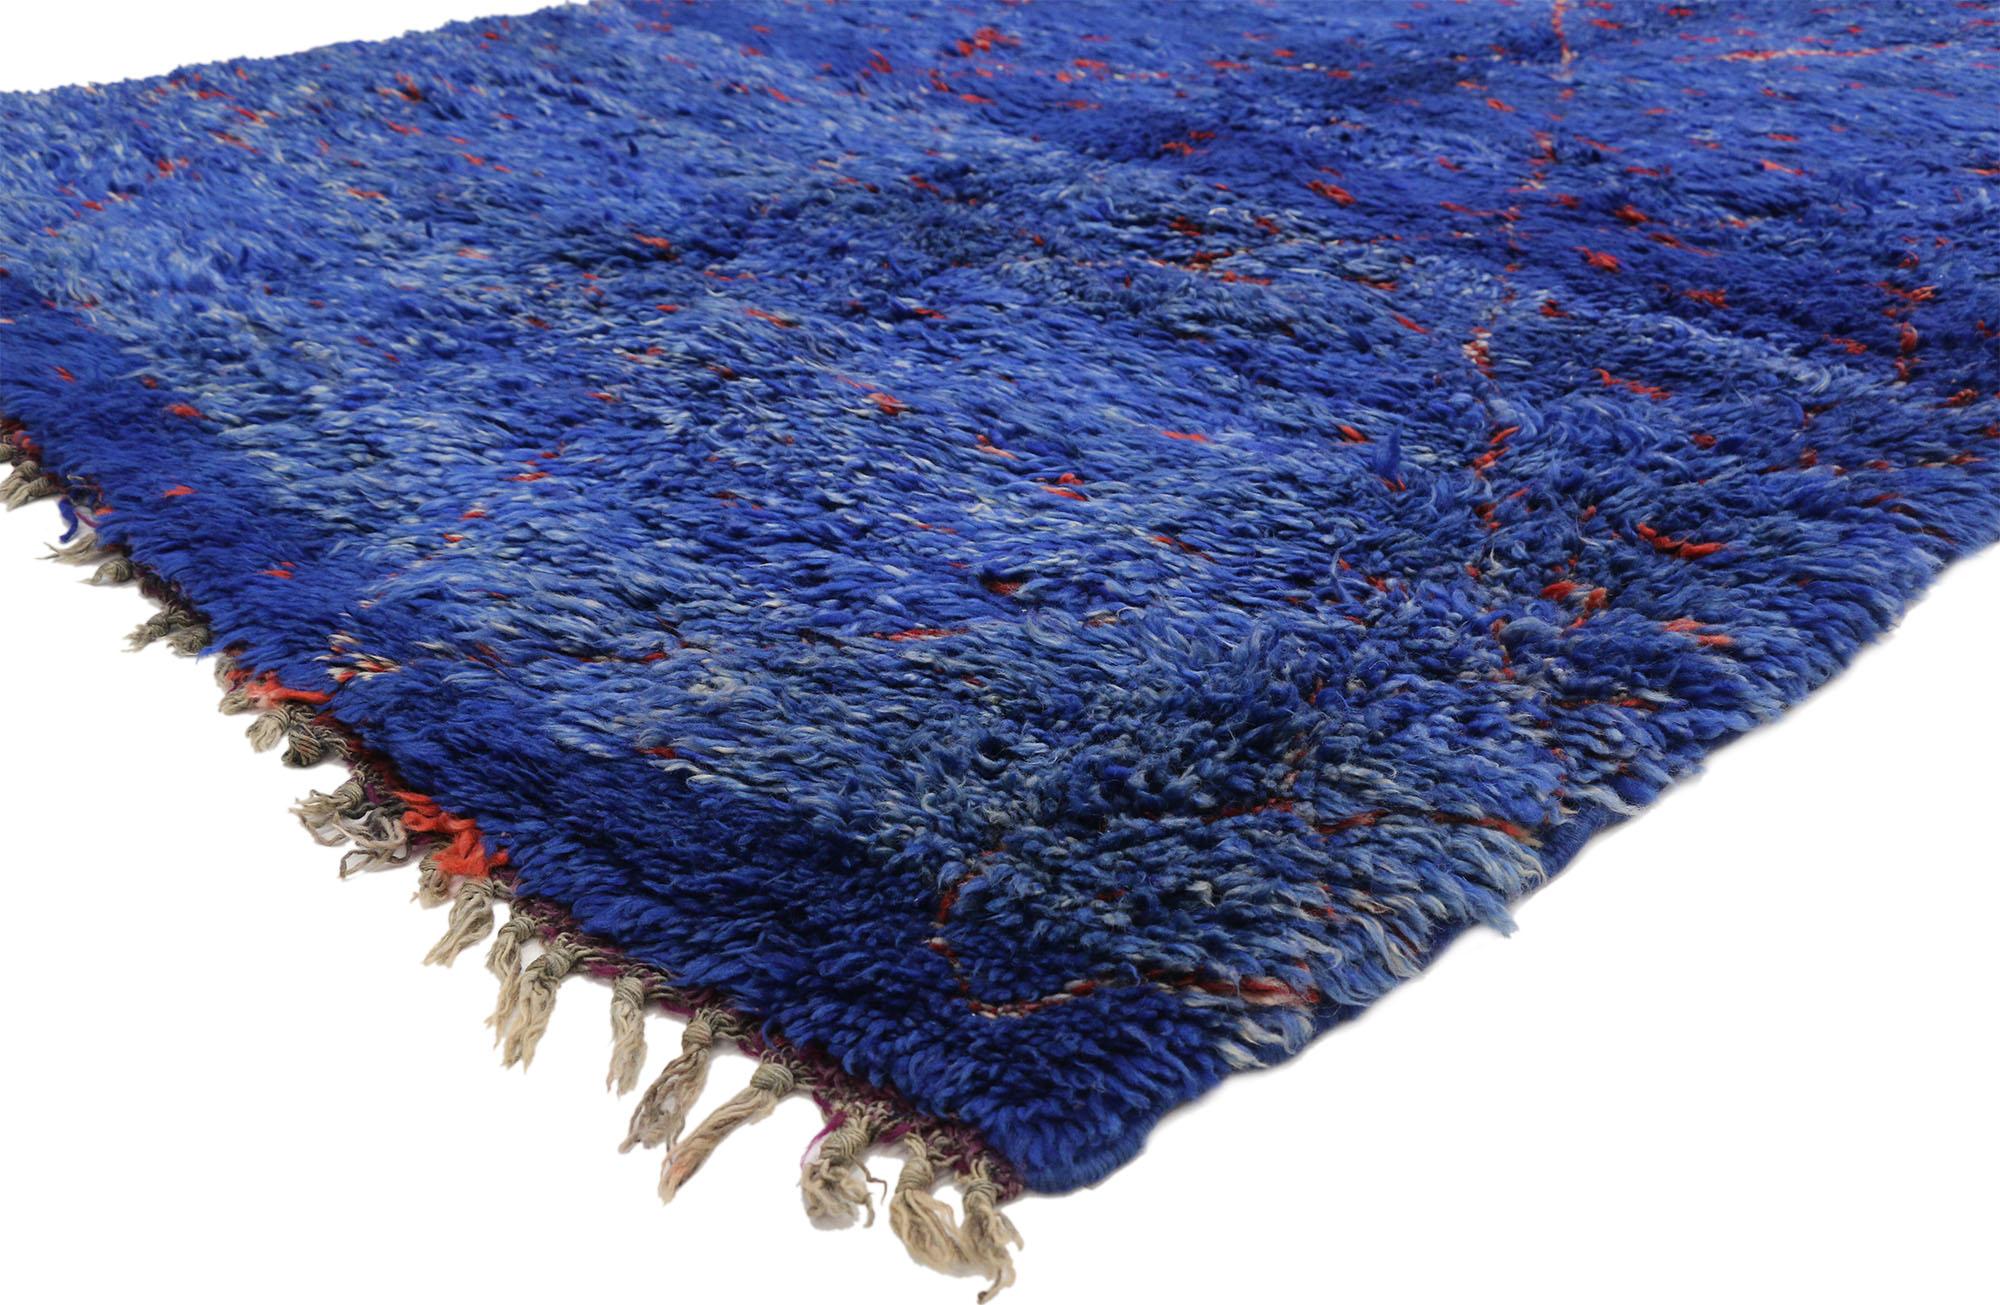 20853, vintage Moroccan rug, Blue Indigo Moroccan Beni Ourain rug. This hand knotted wool vintage blue indigo Beni Ouarain Moroccan rug features an all-over diamond lattice pattern spread across the abrashed royal blue field. The red and ivory lines